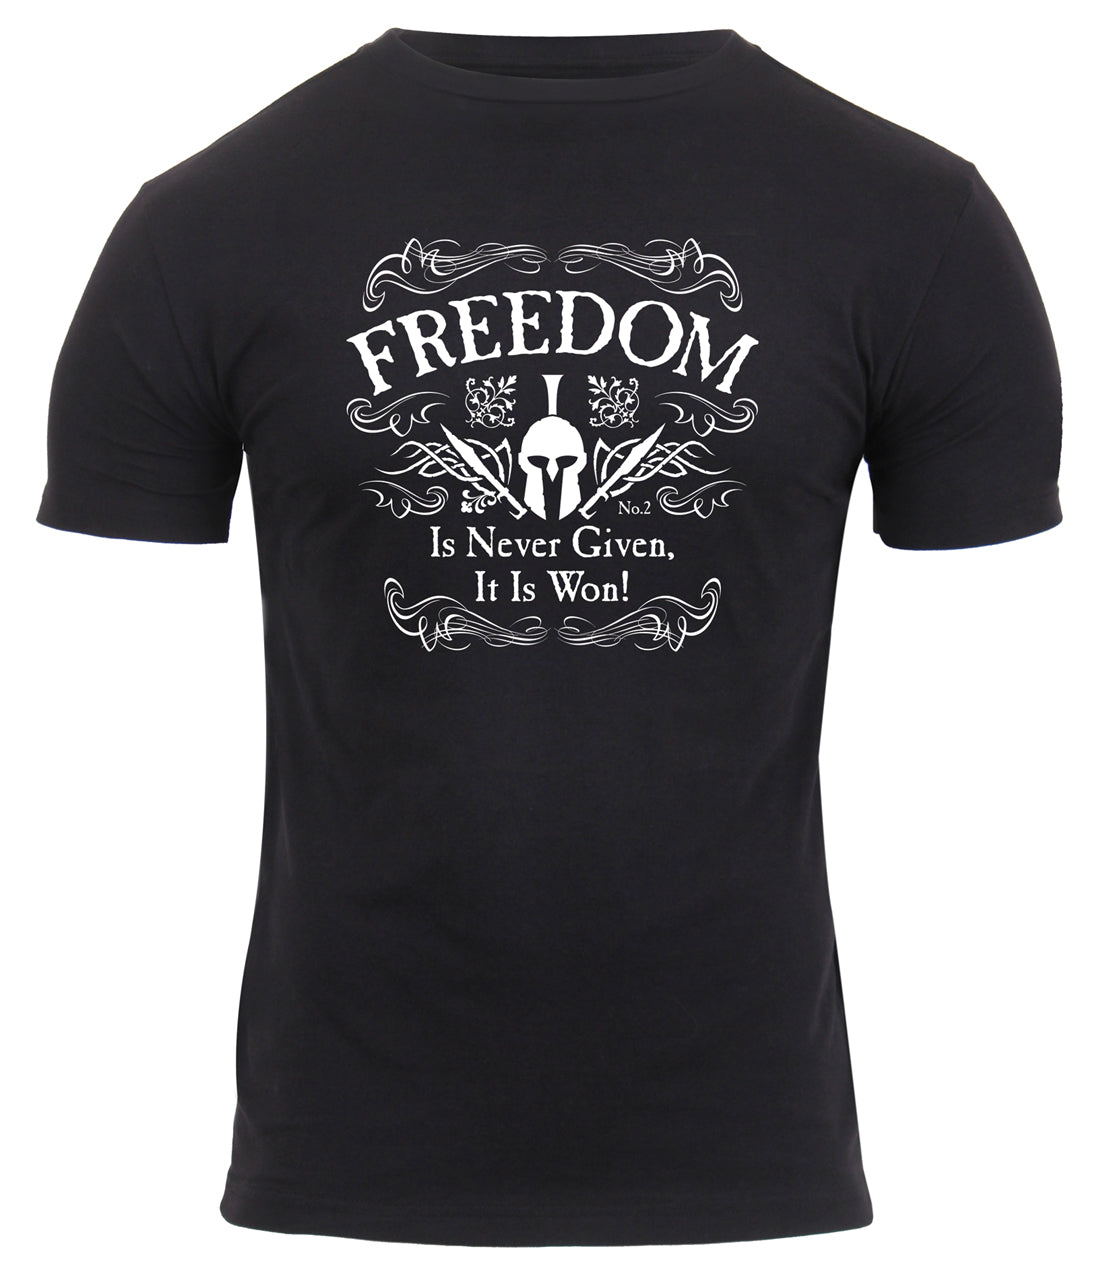 Rothco Athletic Fit Freedom T-Shirt - Tactical Choice Plus